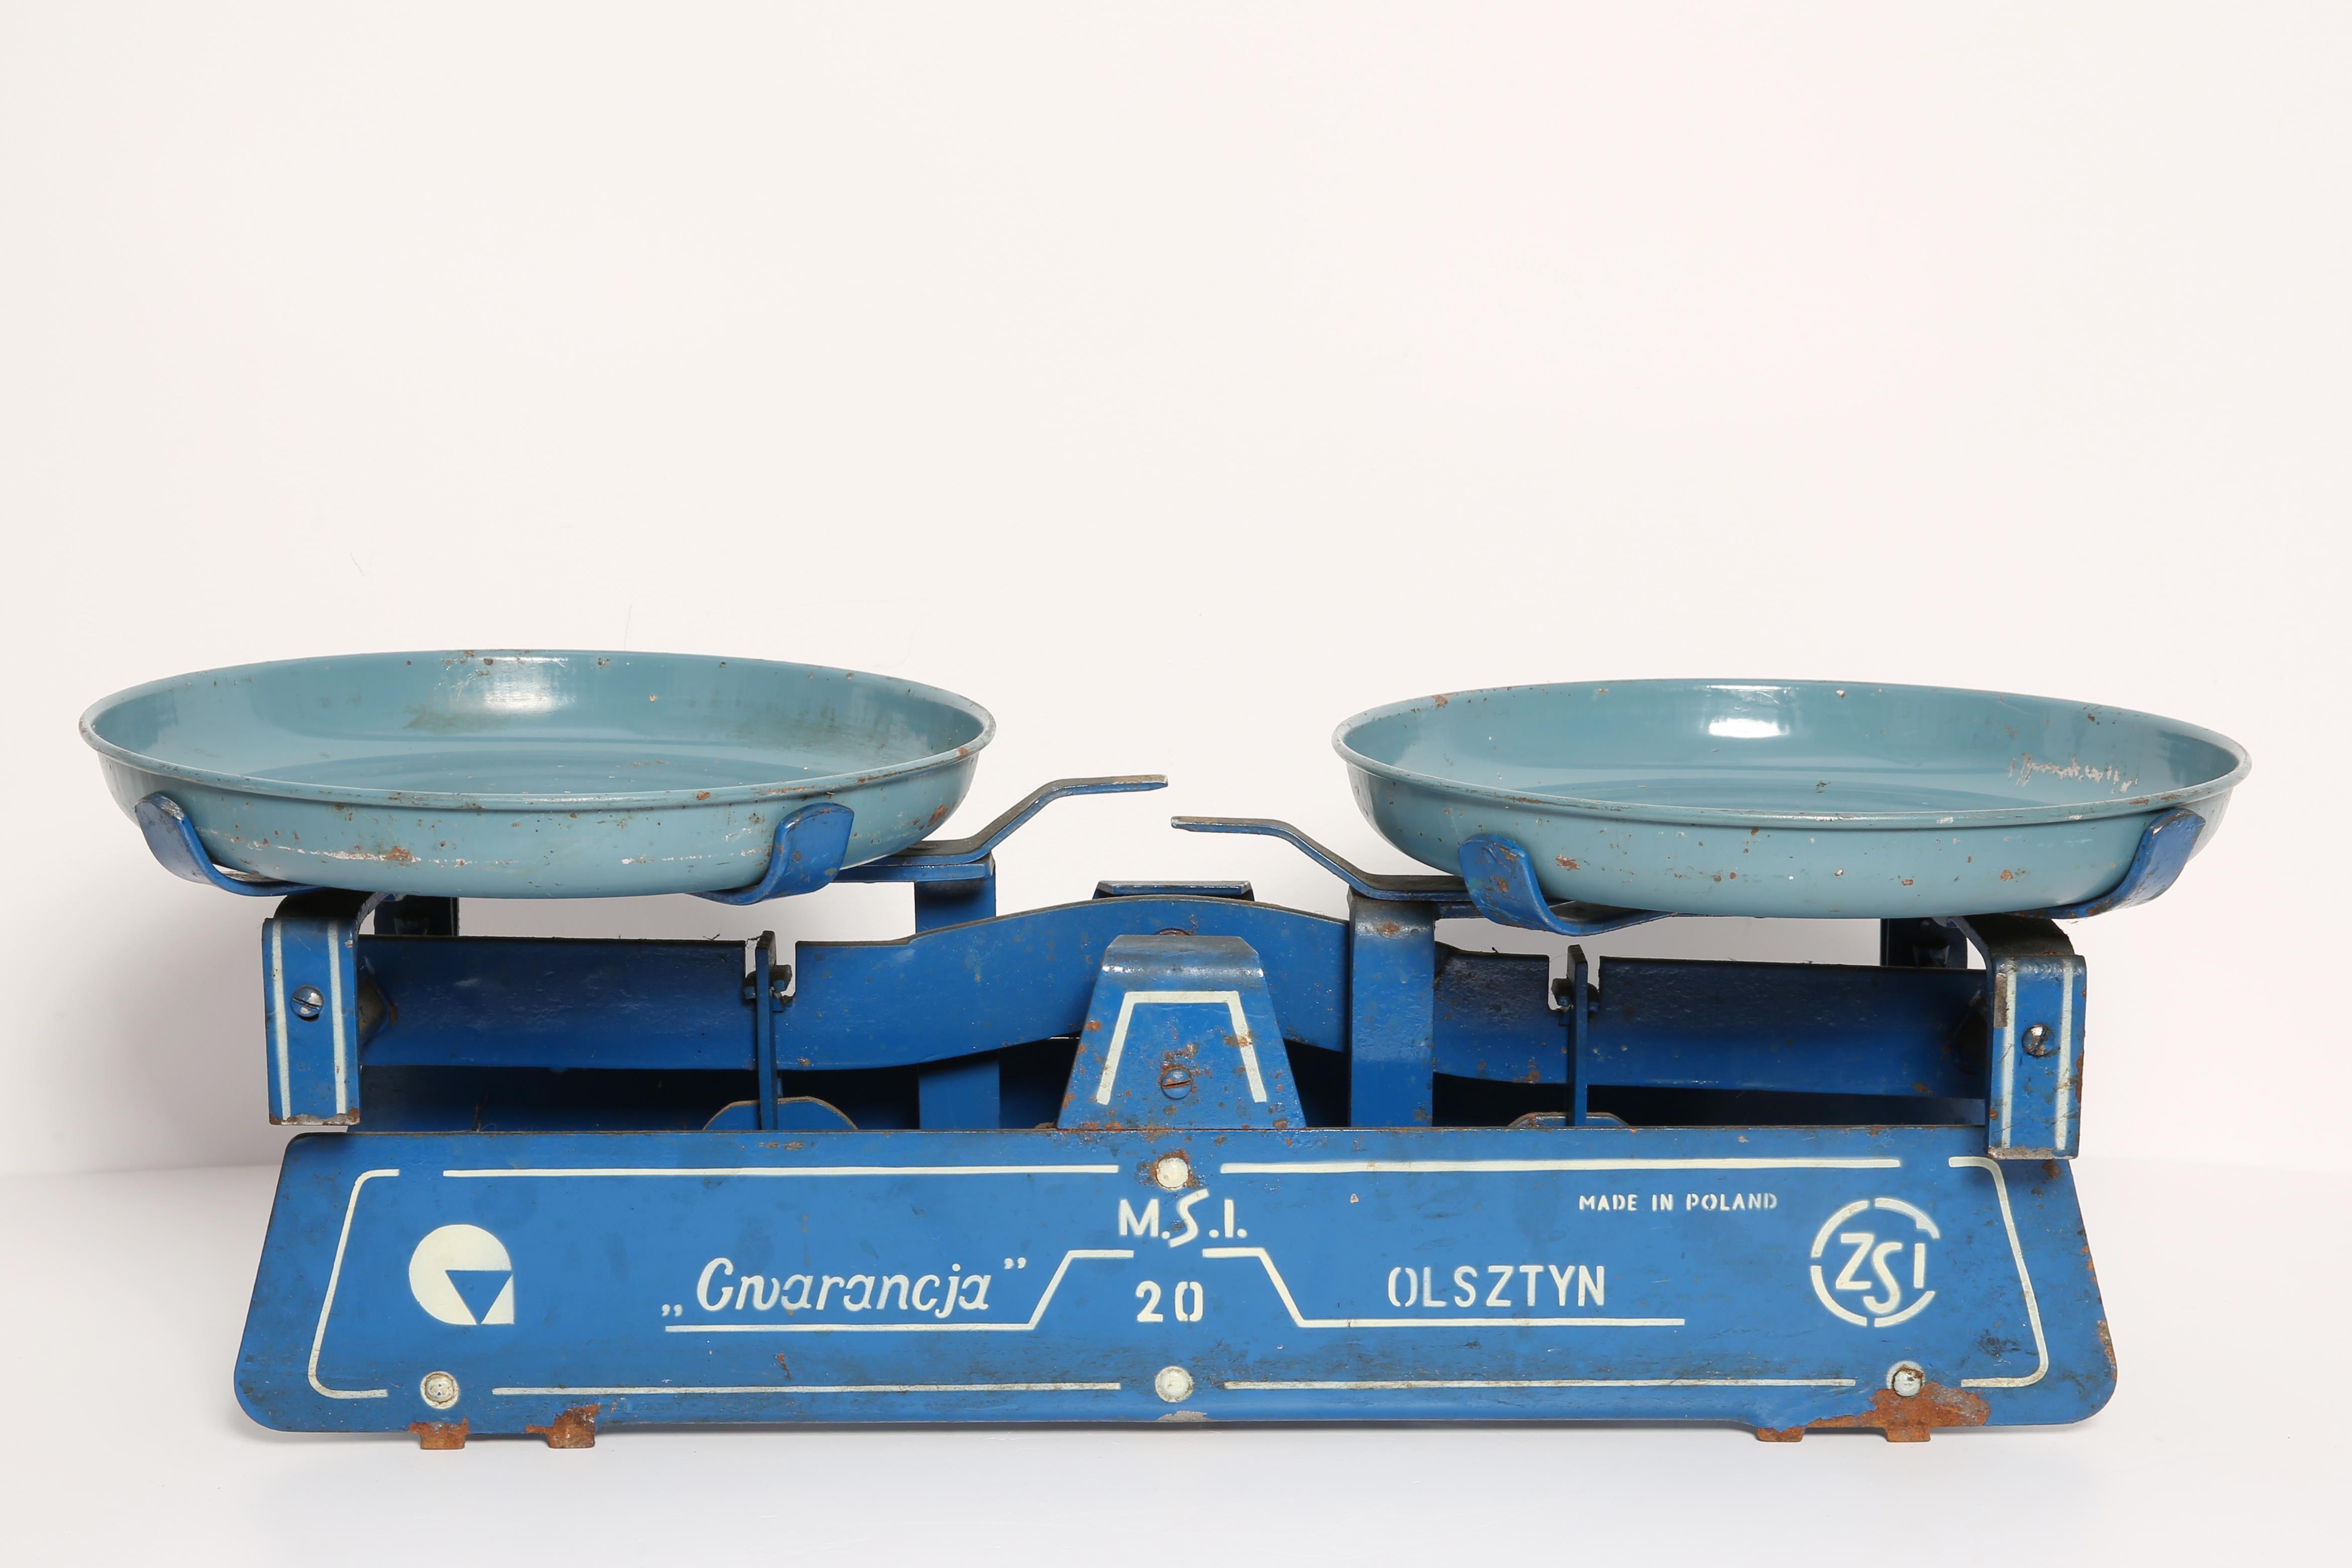 A fantastic antique weighing scale with nicely aged blue paint. Made by Gwarancja Factory in Olsztyn, Poland in the late 20th century. It presents wonderfully and makes excellent home, office or business decor. This 